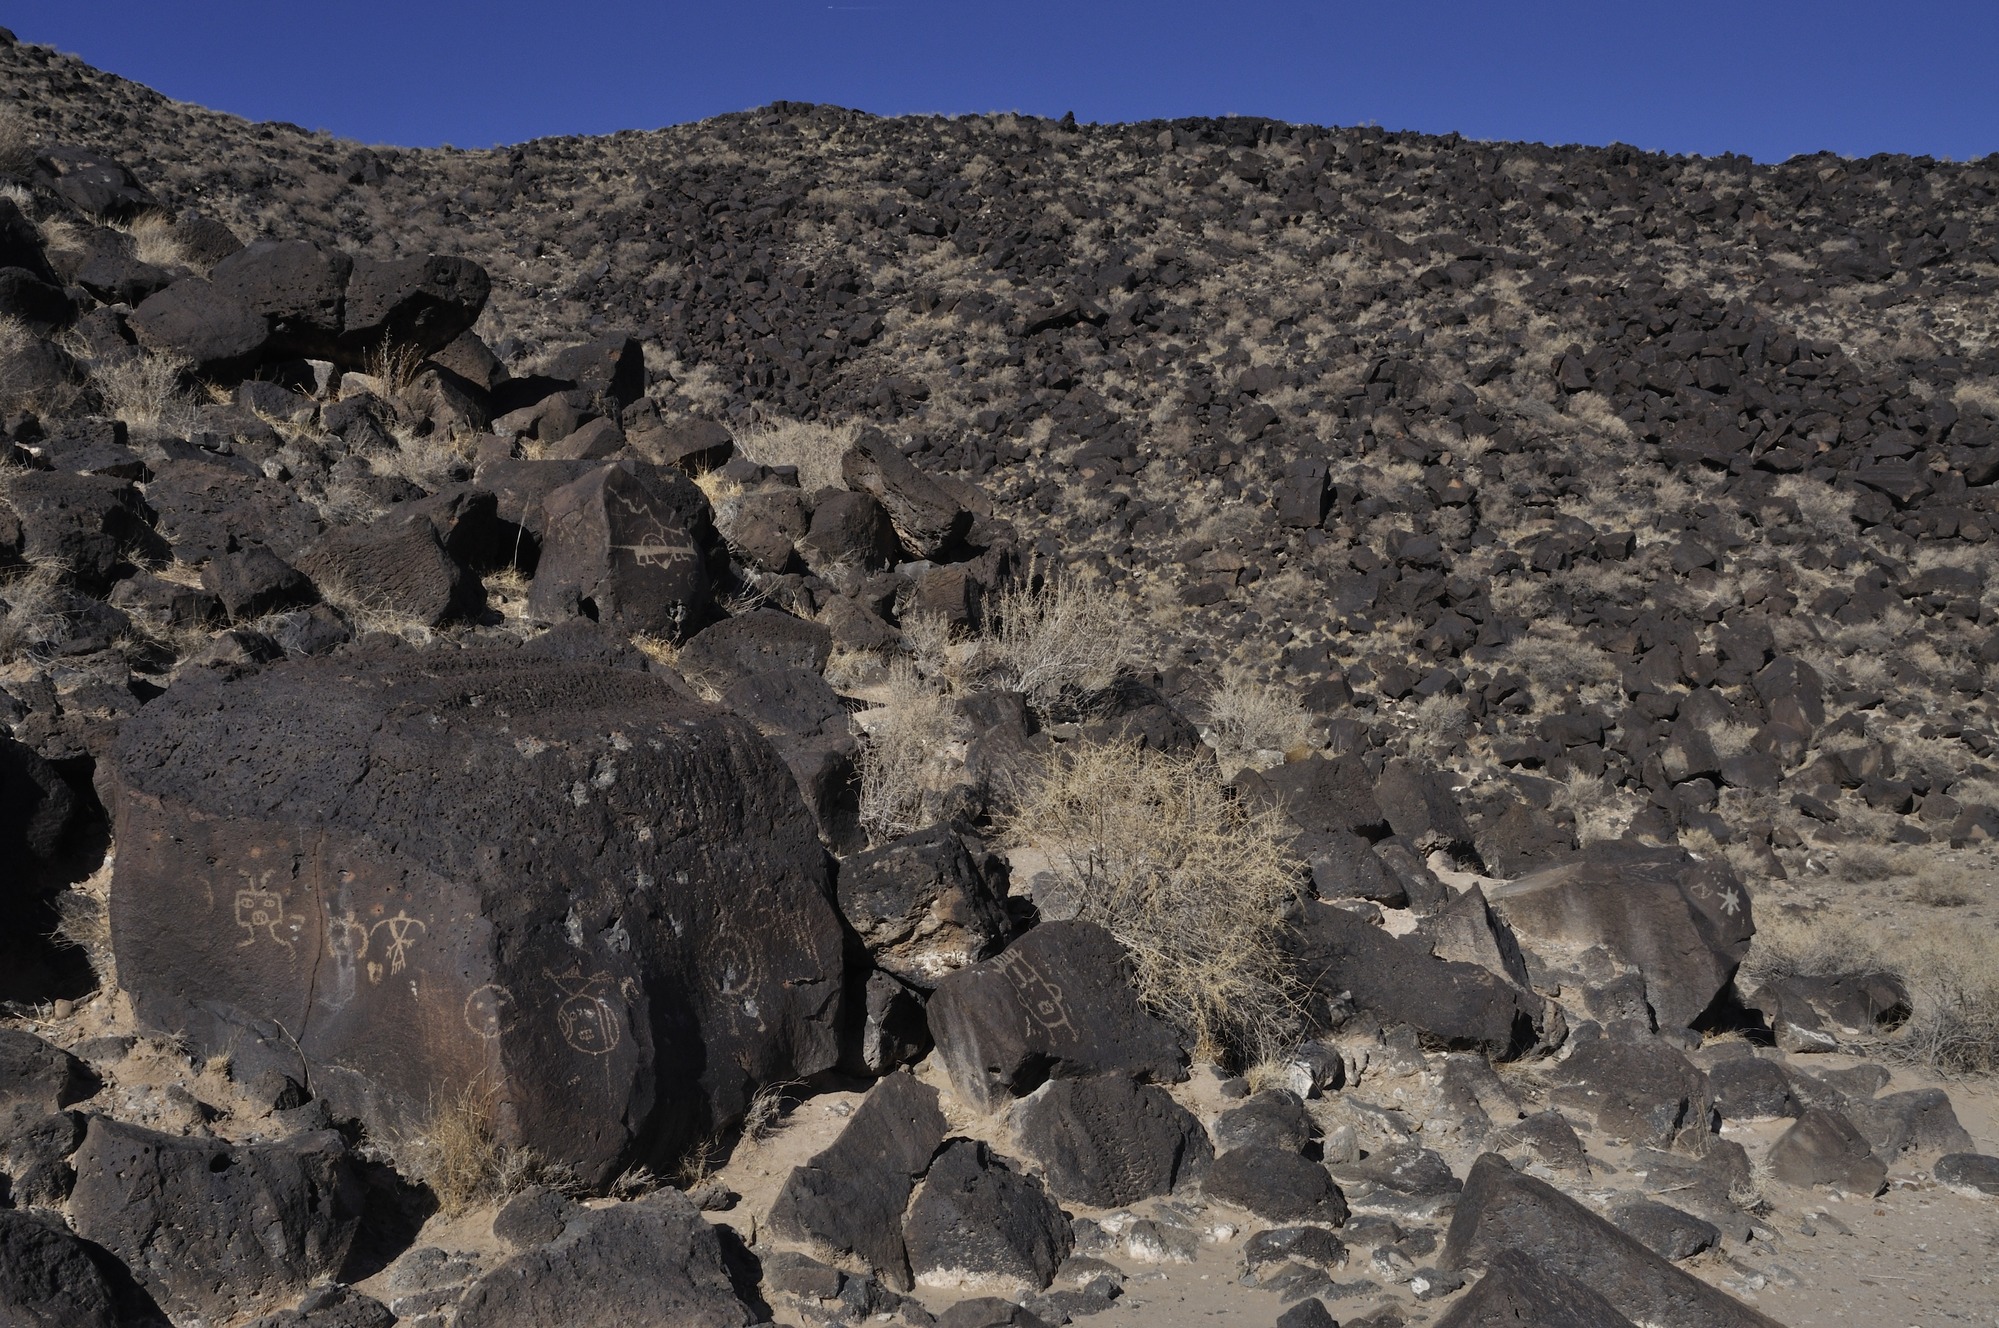 Photograph of blocks of large basalt blocks with petroglyphs carved into the dark patina of desert varnish on the large boulders, exposing the lighter colored basaltic rock beneath. 